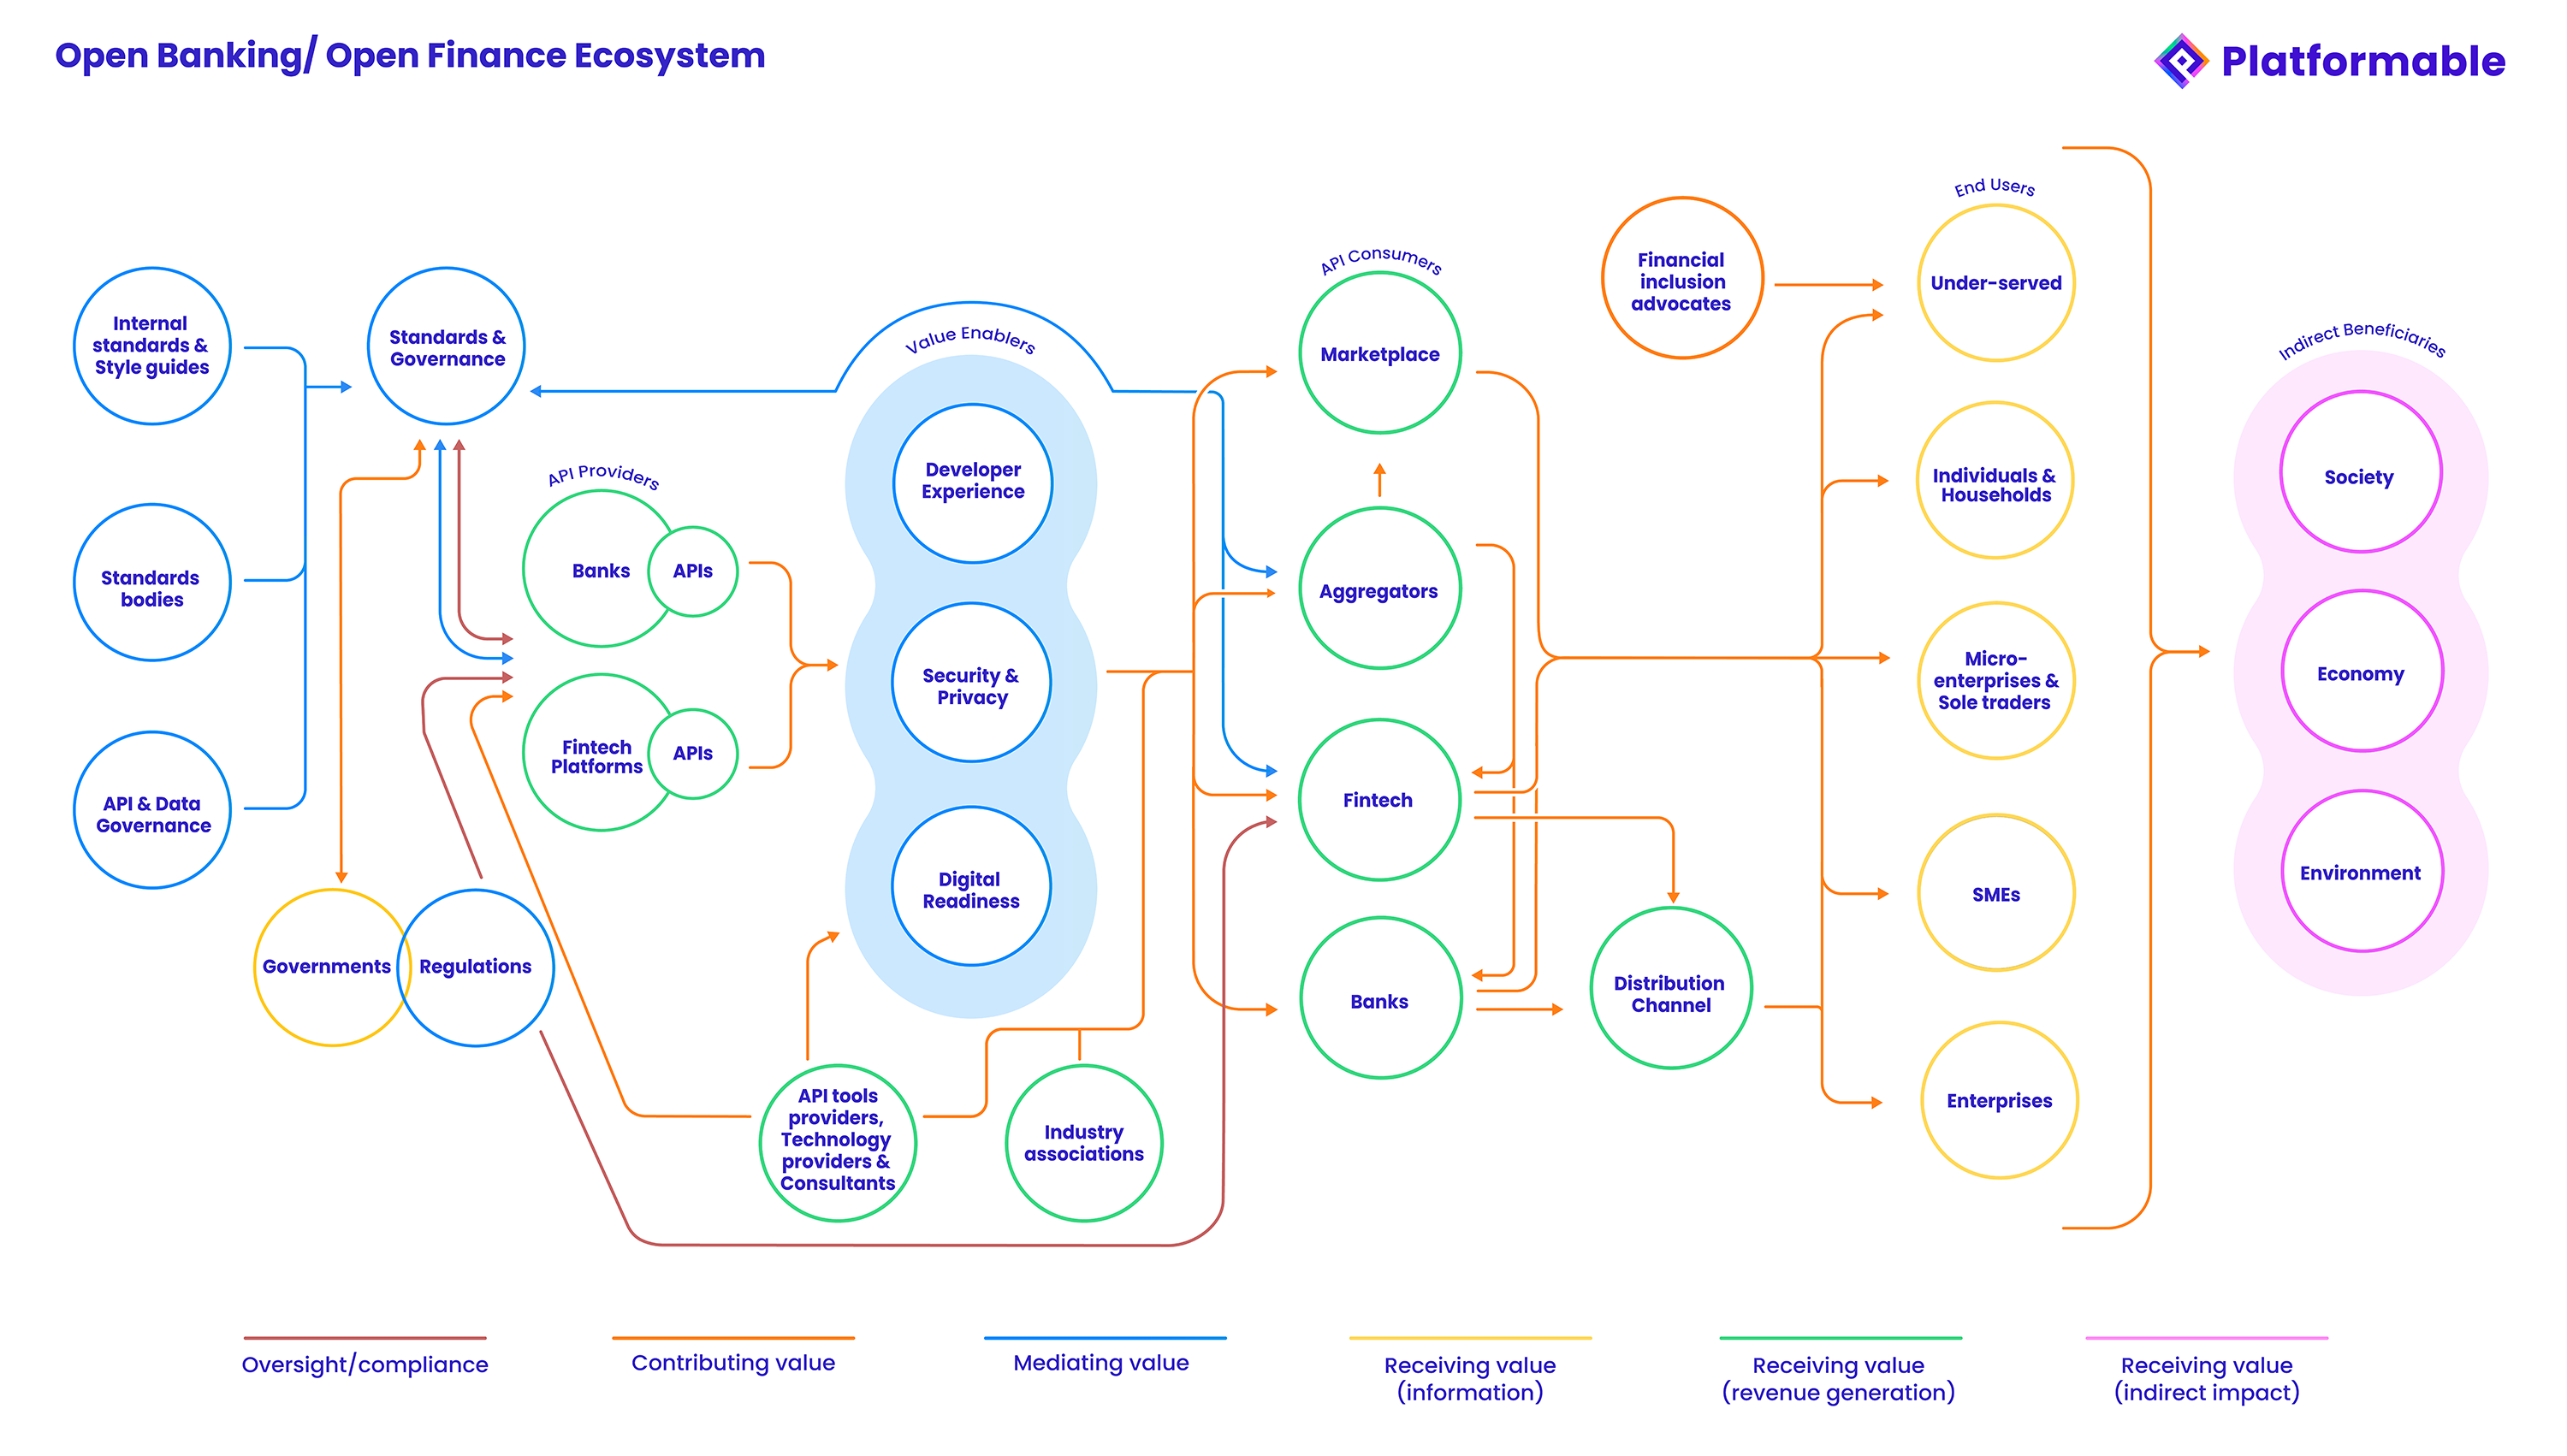 Value model describing how open banking and open finance ecosystems generate and distribute value amongst stakeholders